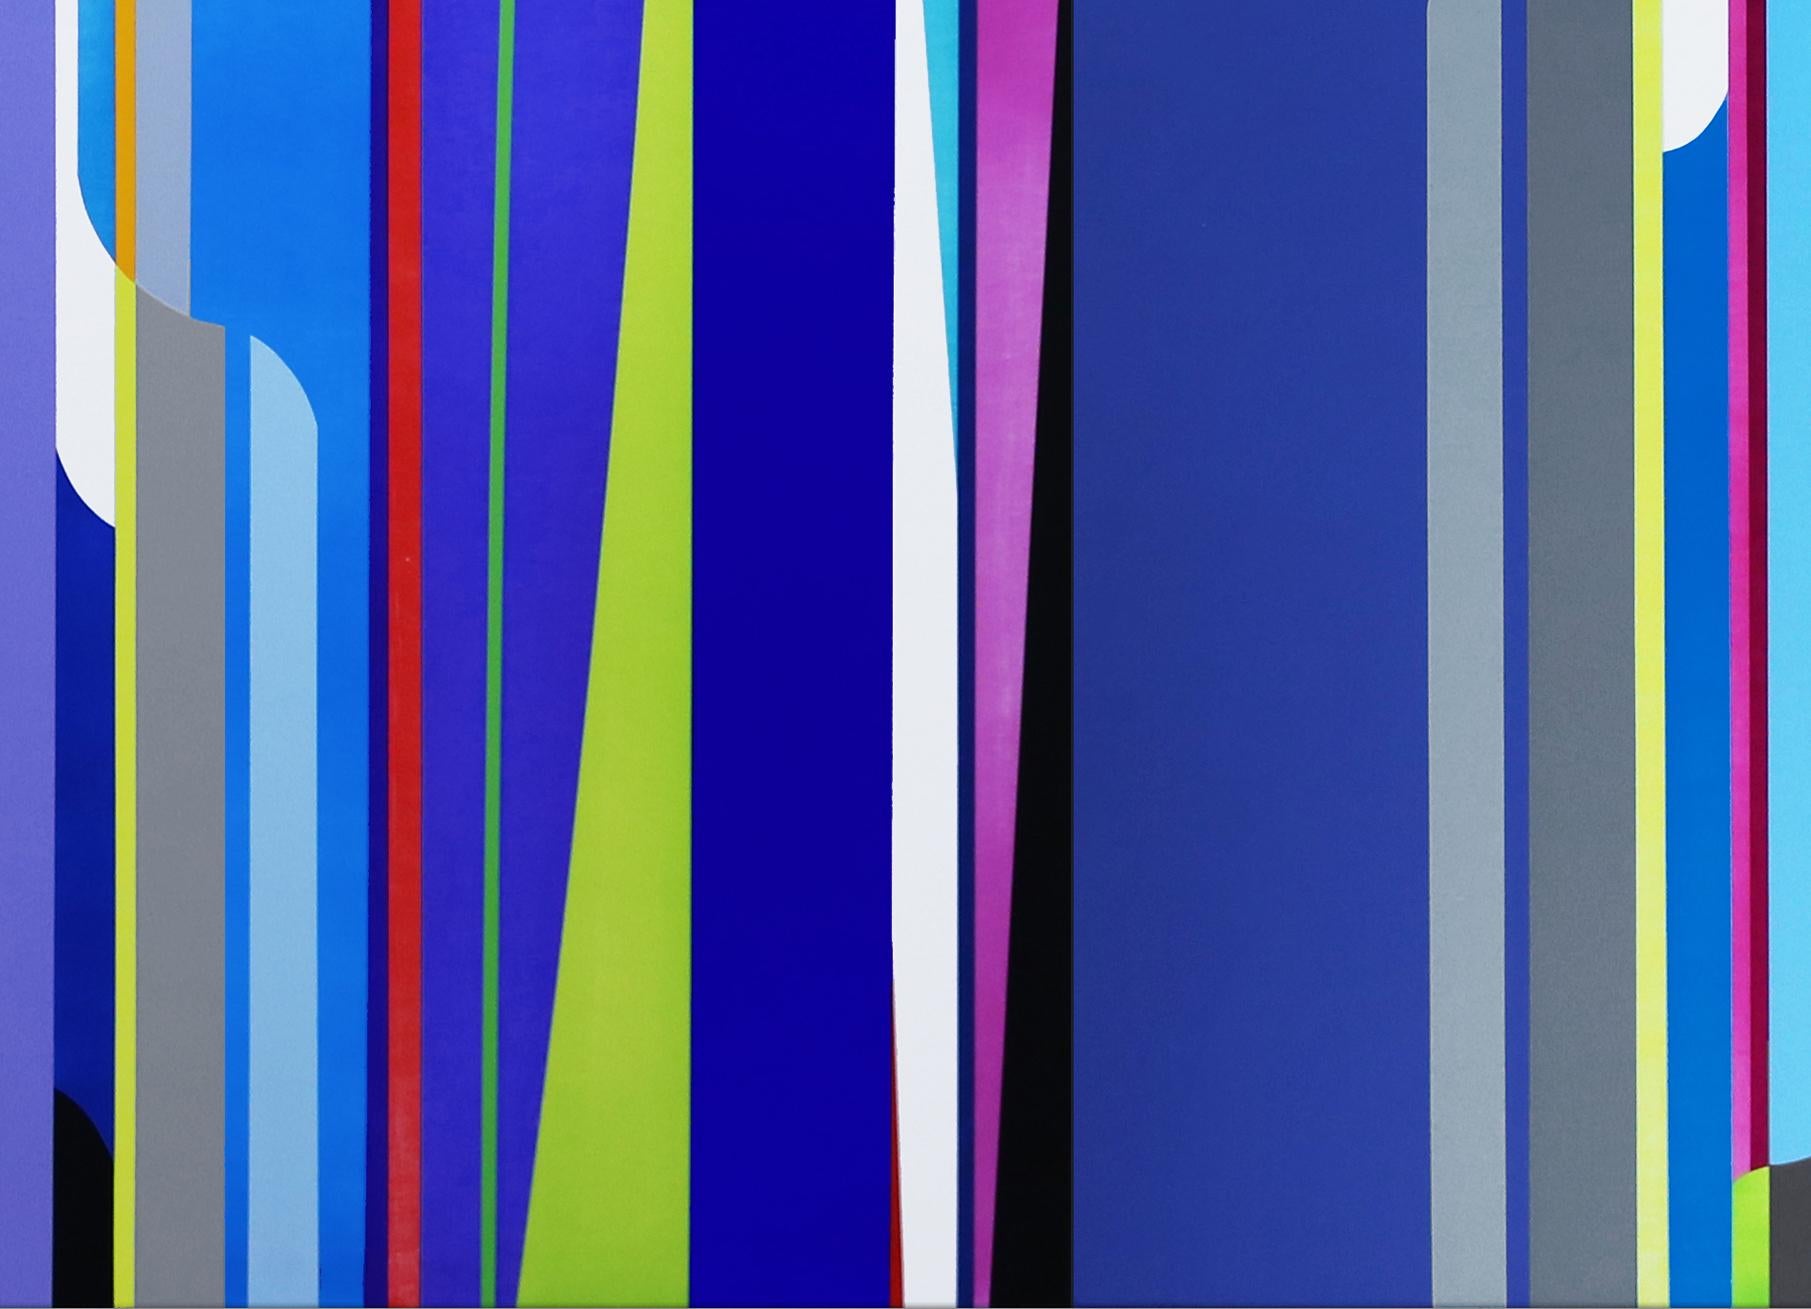 acrylic on canvas (three canvases)

Dion Johnson’s studio practice exists at the intersection of intention and reaction. His pared down visual vocabulary in combination with hard-edged abstraction result in brightly colored forms that collide,